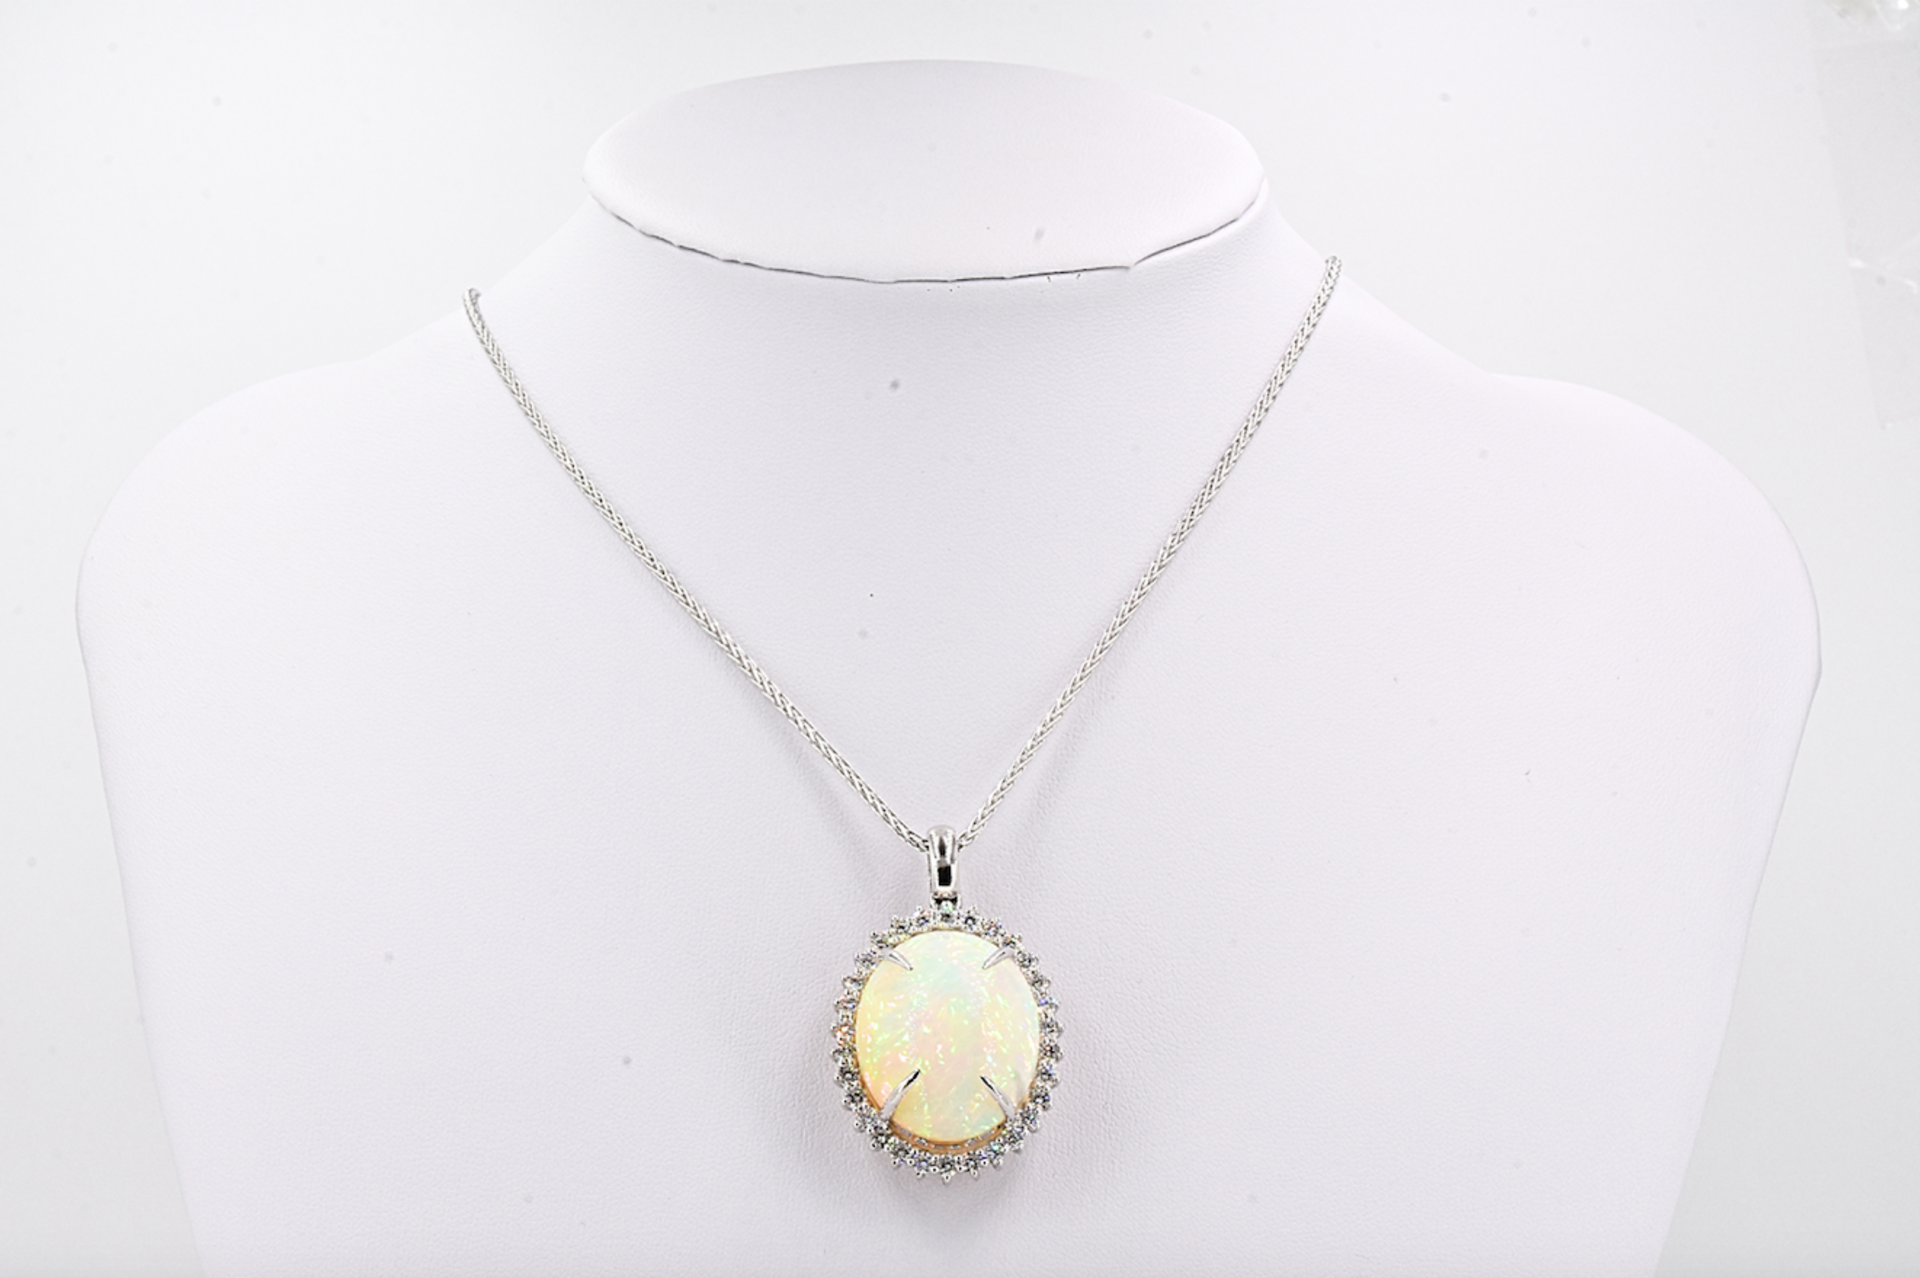 Necklace - 31.10 Ct. Opal - 1.88 Ct Diamonds - Image 6 of 7